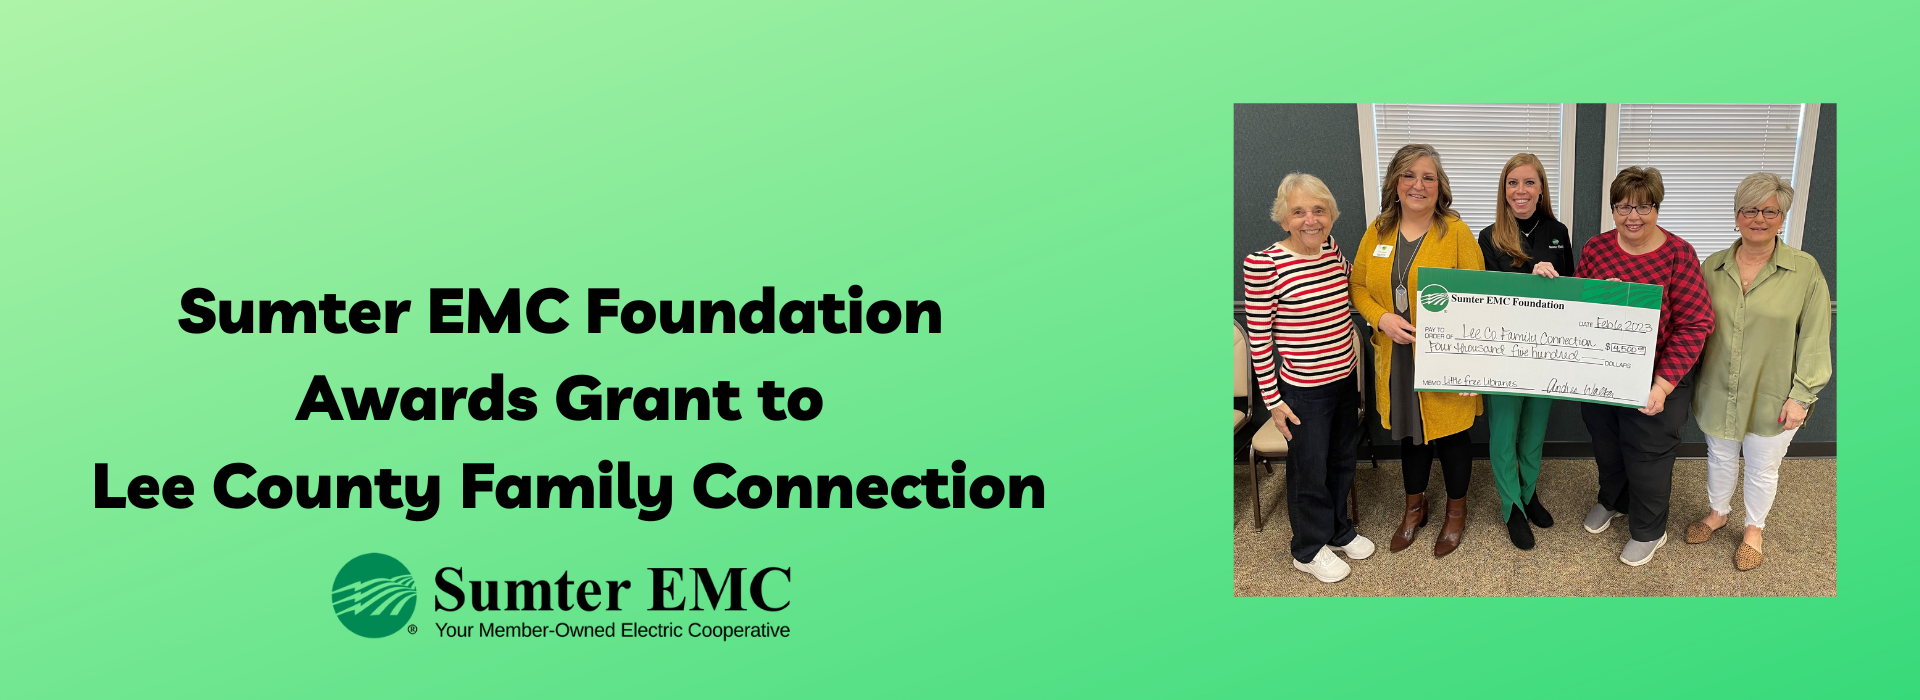 Sumter EMC Foundation Awards Grant to Lee County Family Connection